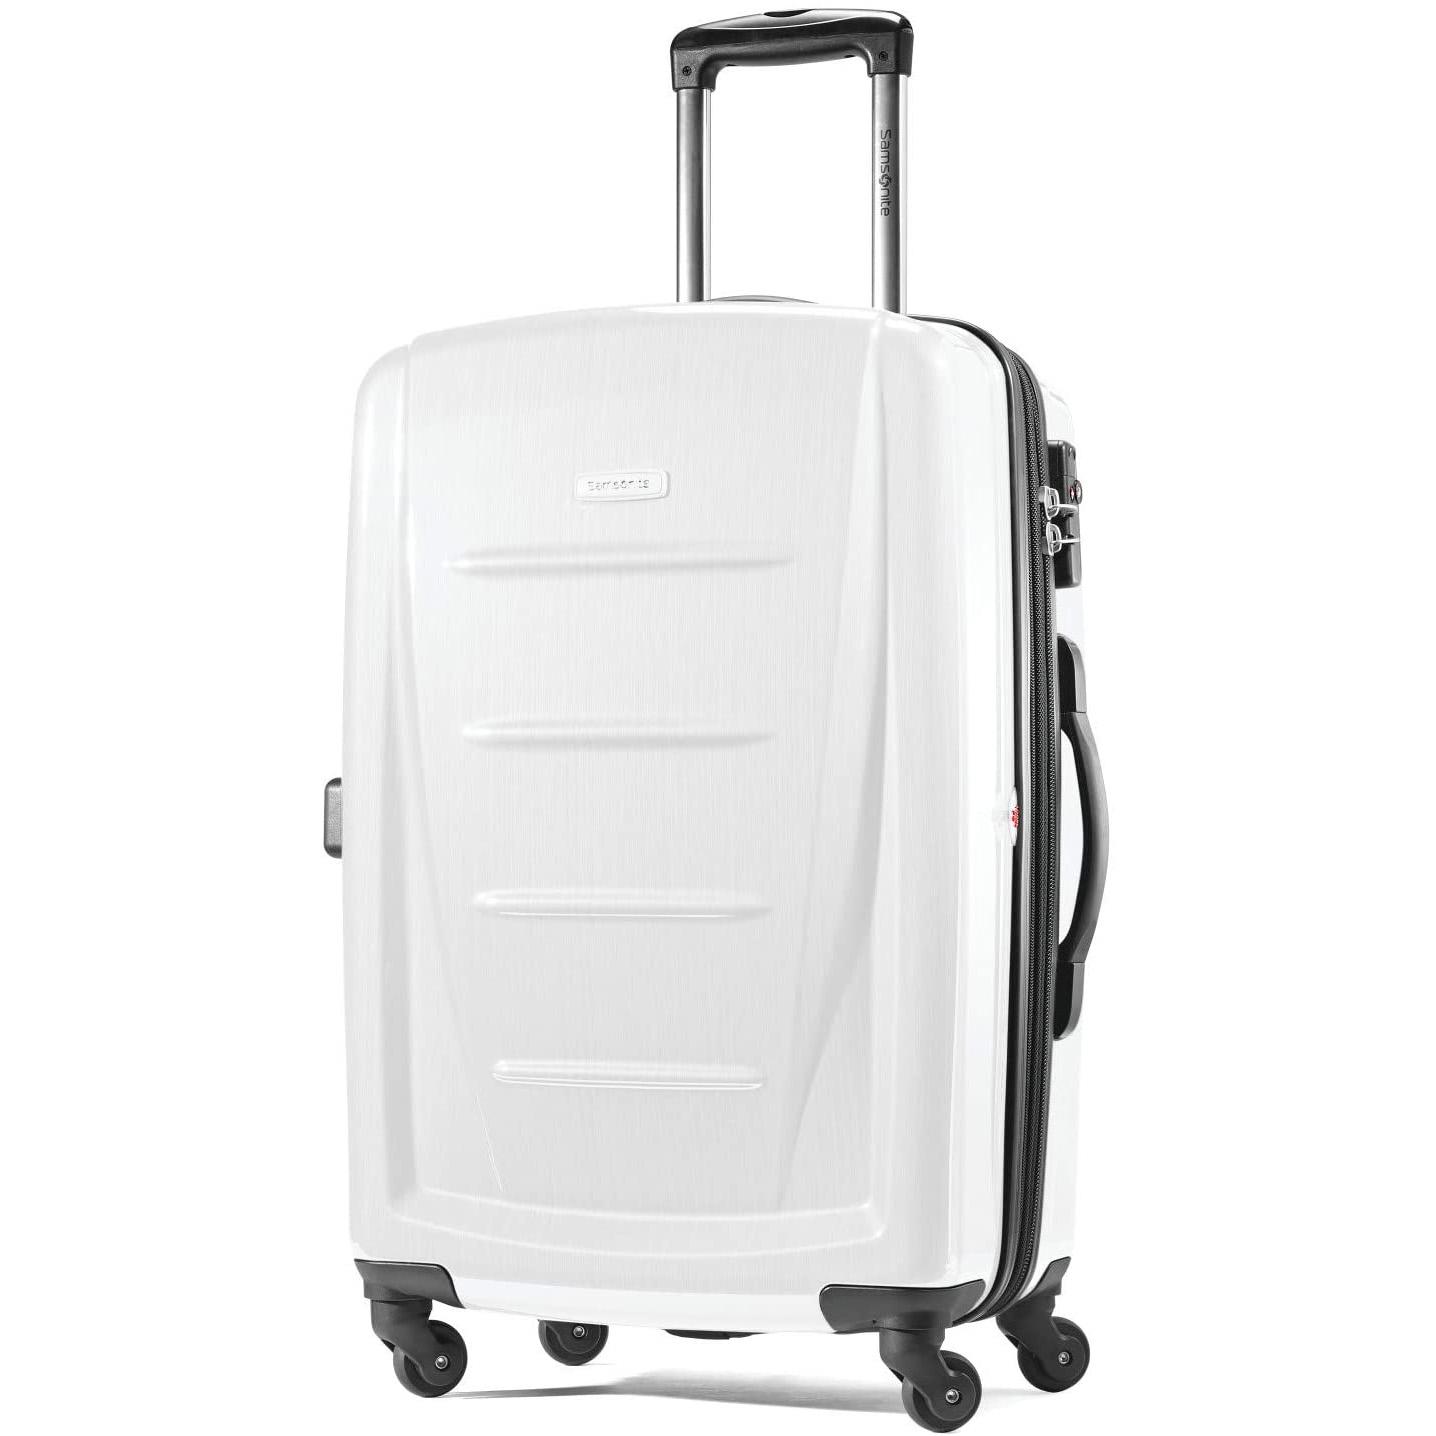 24in Samsonite Winfield 2 Hardside Spinner Luggage for $96.43 Shipped